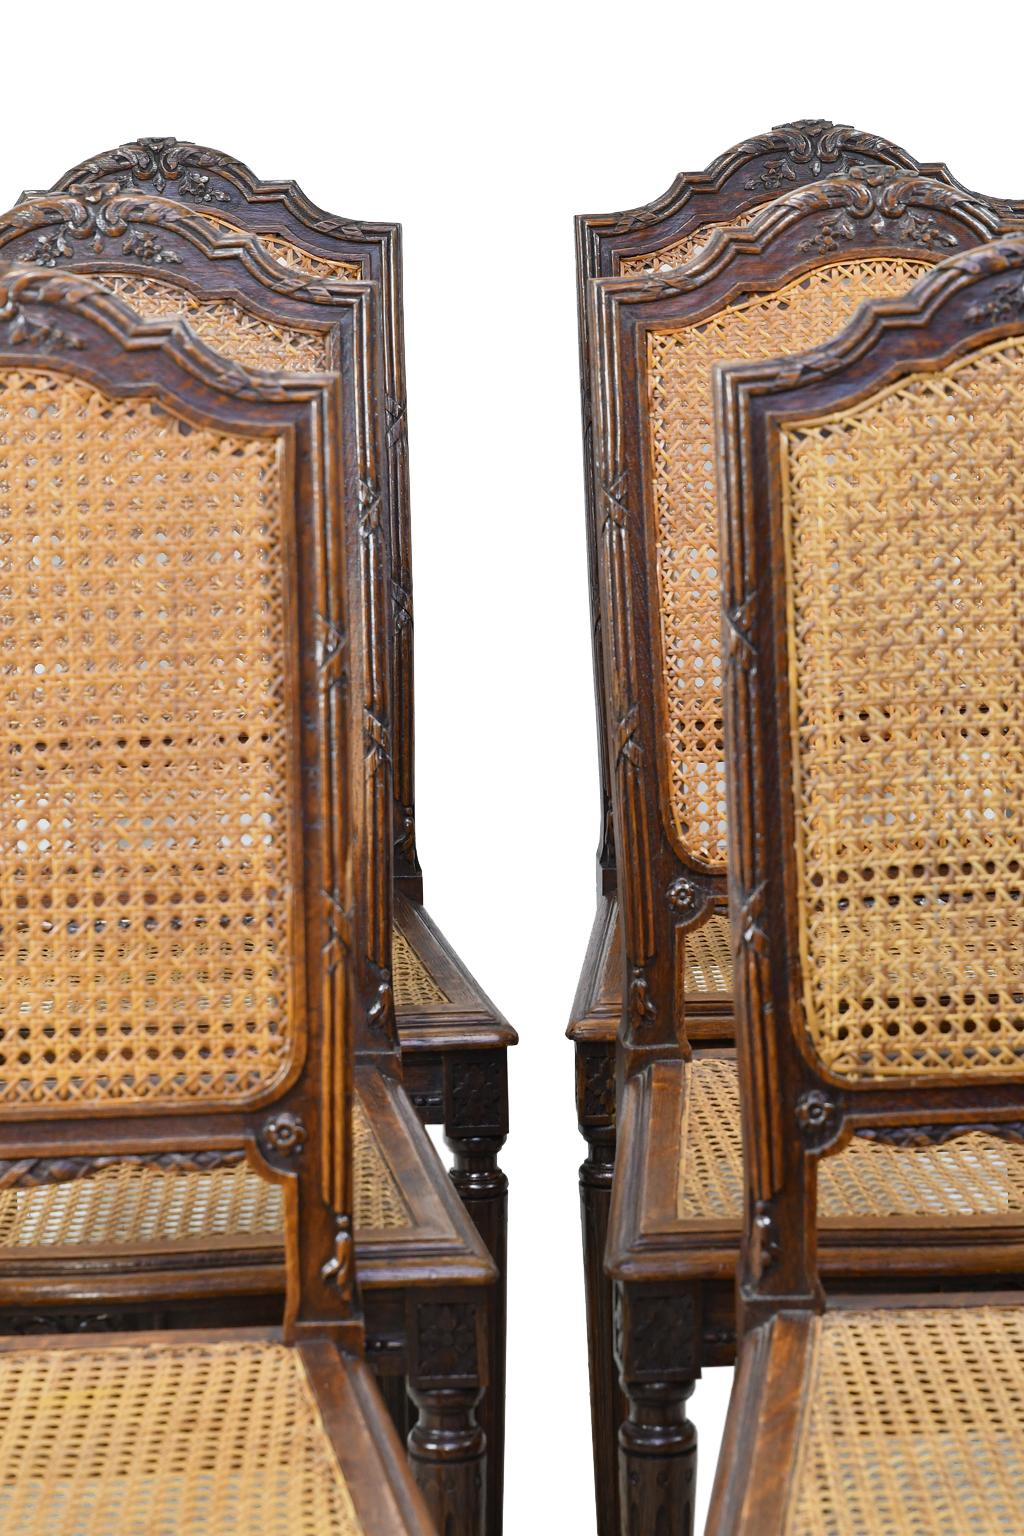 A beautiful set of six dining chairs in the French Louis XVI style with woven cane seat and back, with carved crest on arched back, and resting on turned and reeded legs. France or Belgium, circa 1880. Caning is in very good condition, and chairs